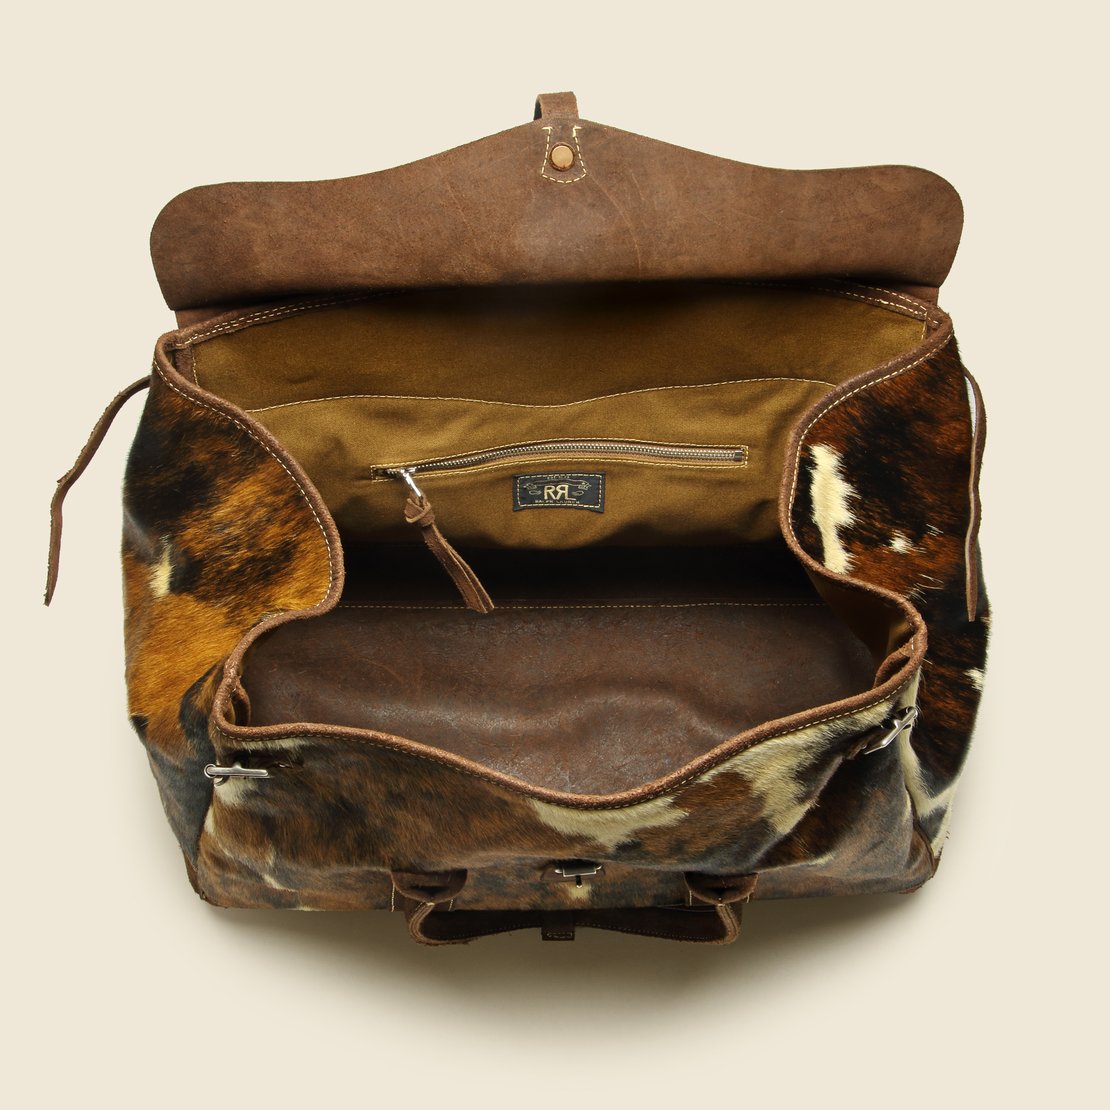 Hair-on-Hide Overnight Bag - RRL - STAG Provisions - Accessories - Bags / Luggage